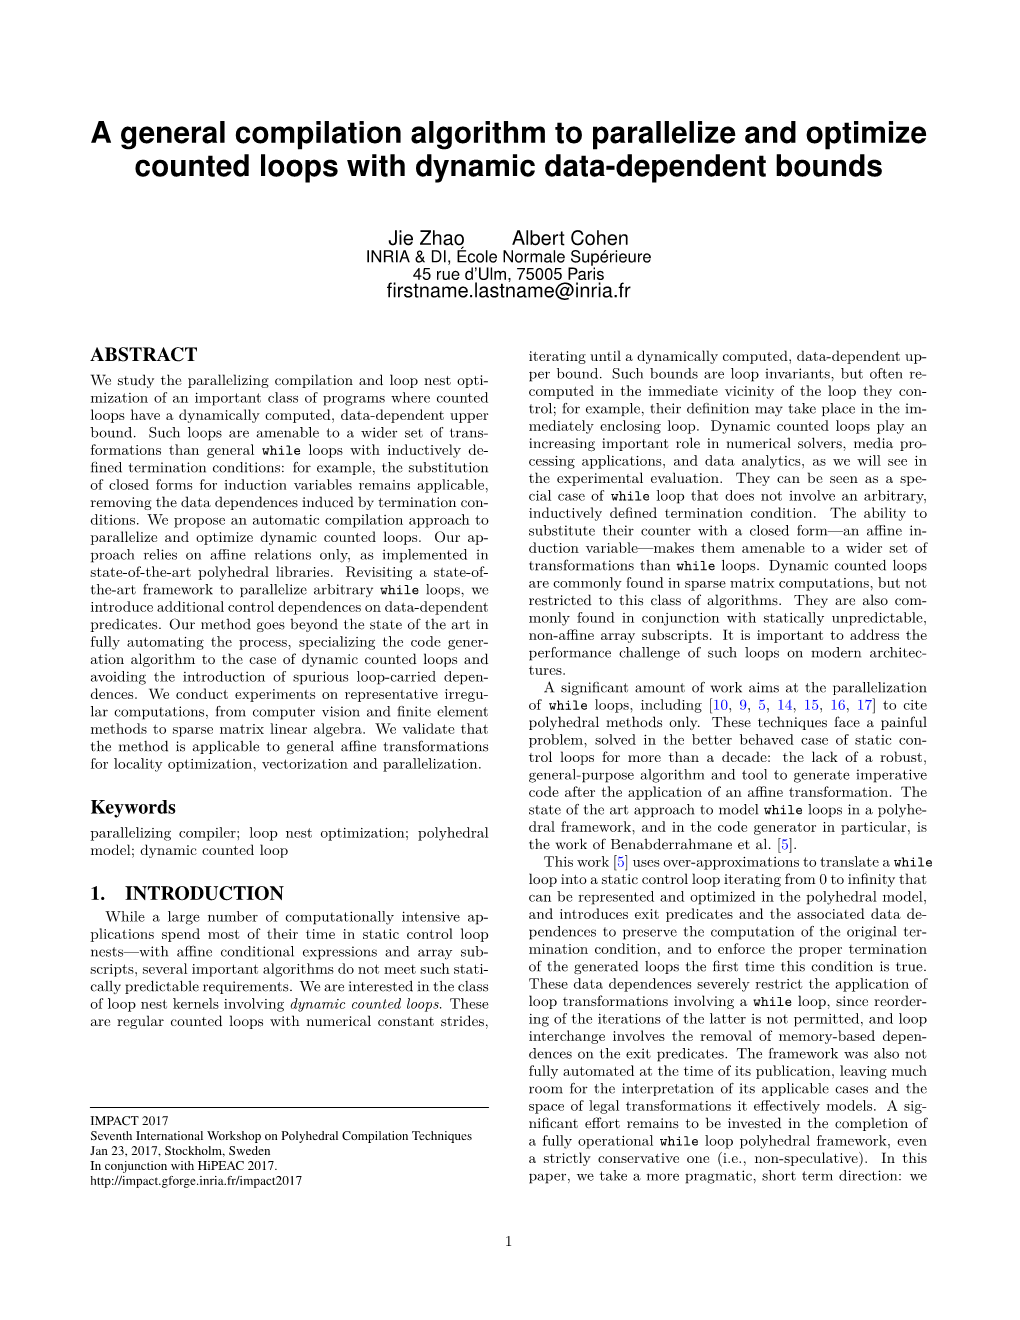 A General Compilation Algorithm to Parallelize and Optimize Counted Loops with Dynamic Data-Dependent Bounds